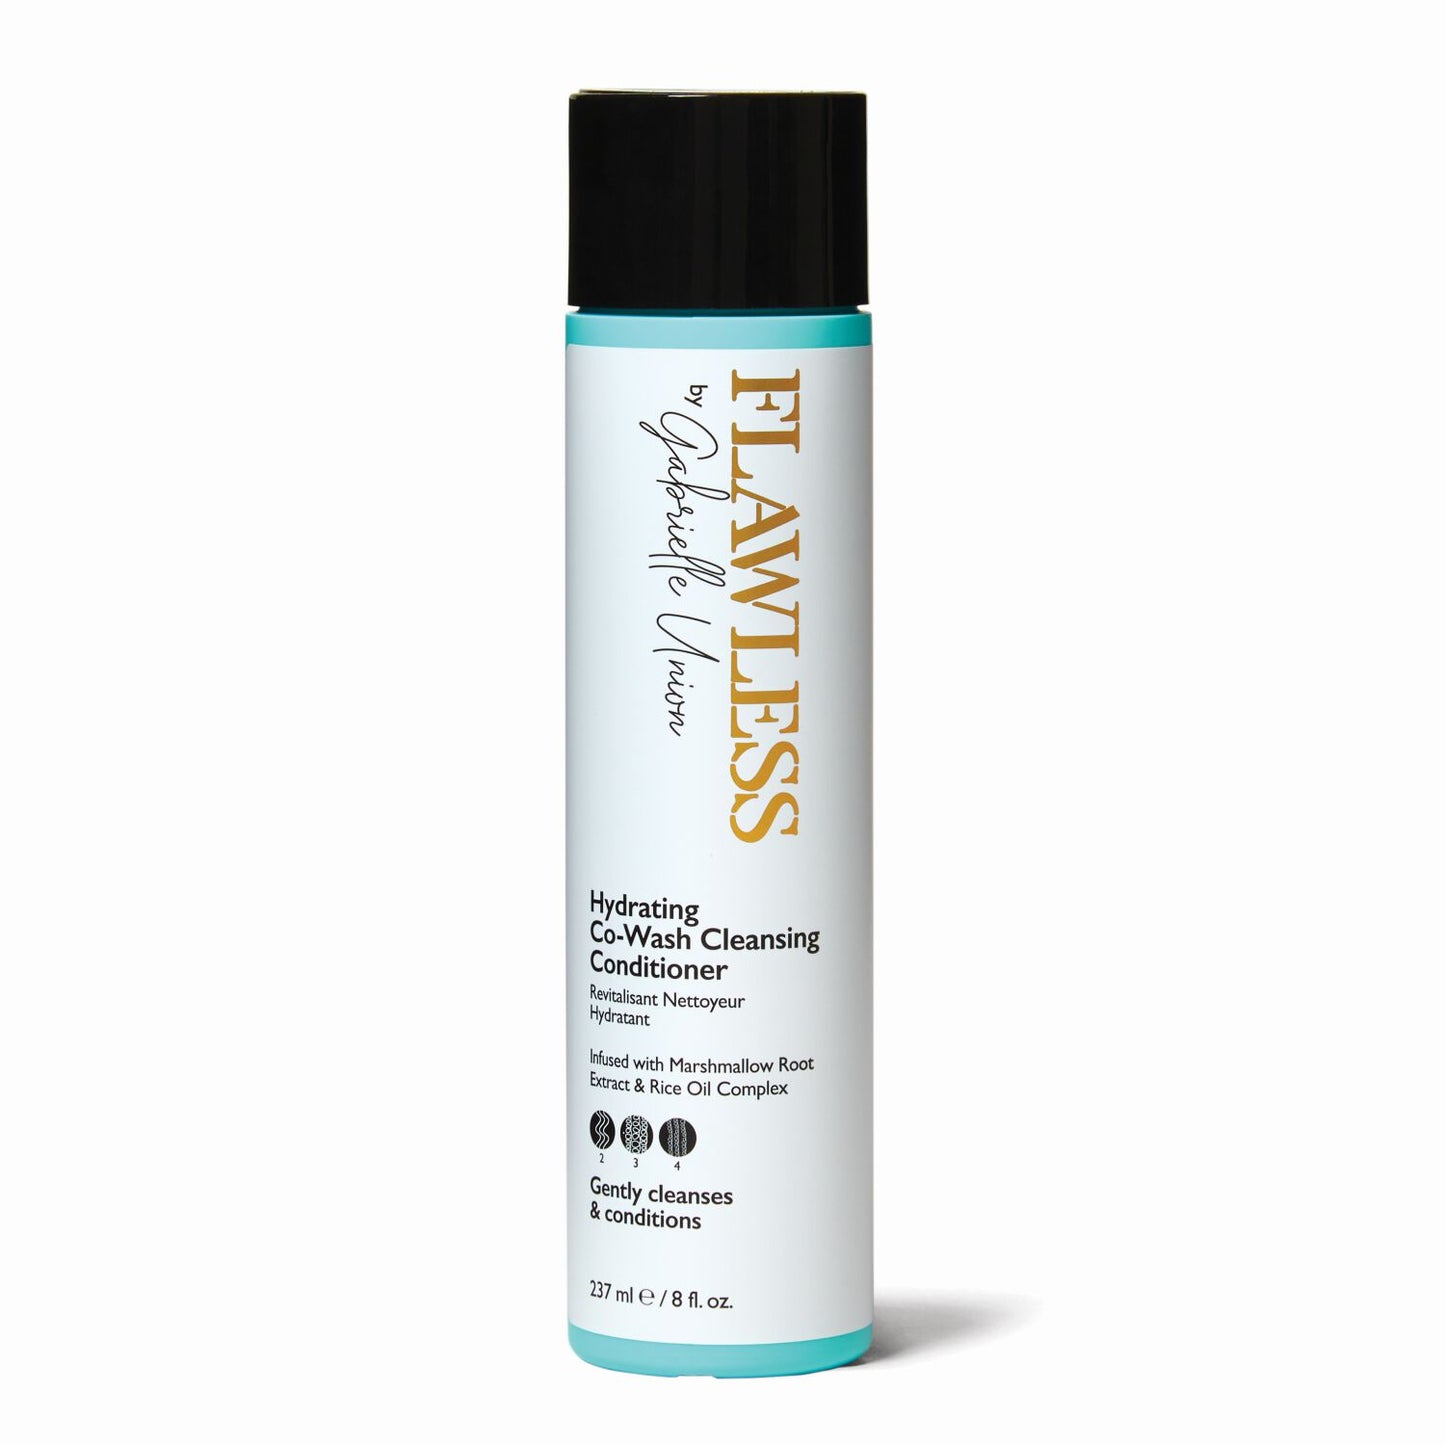 Flawless by Gabrielle Union Hydrating Co-Wash Cleansing Conditioner